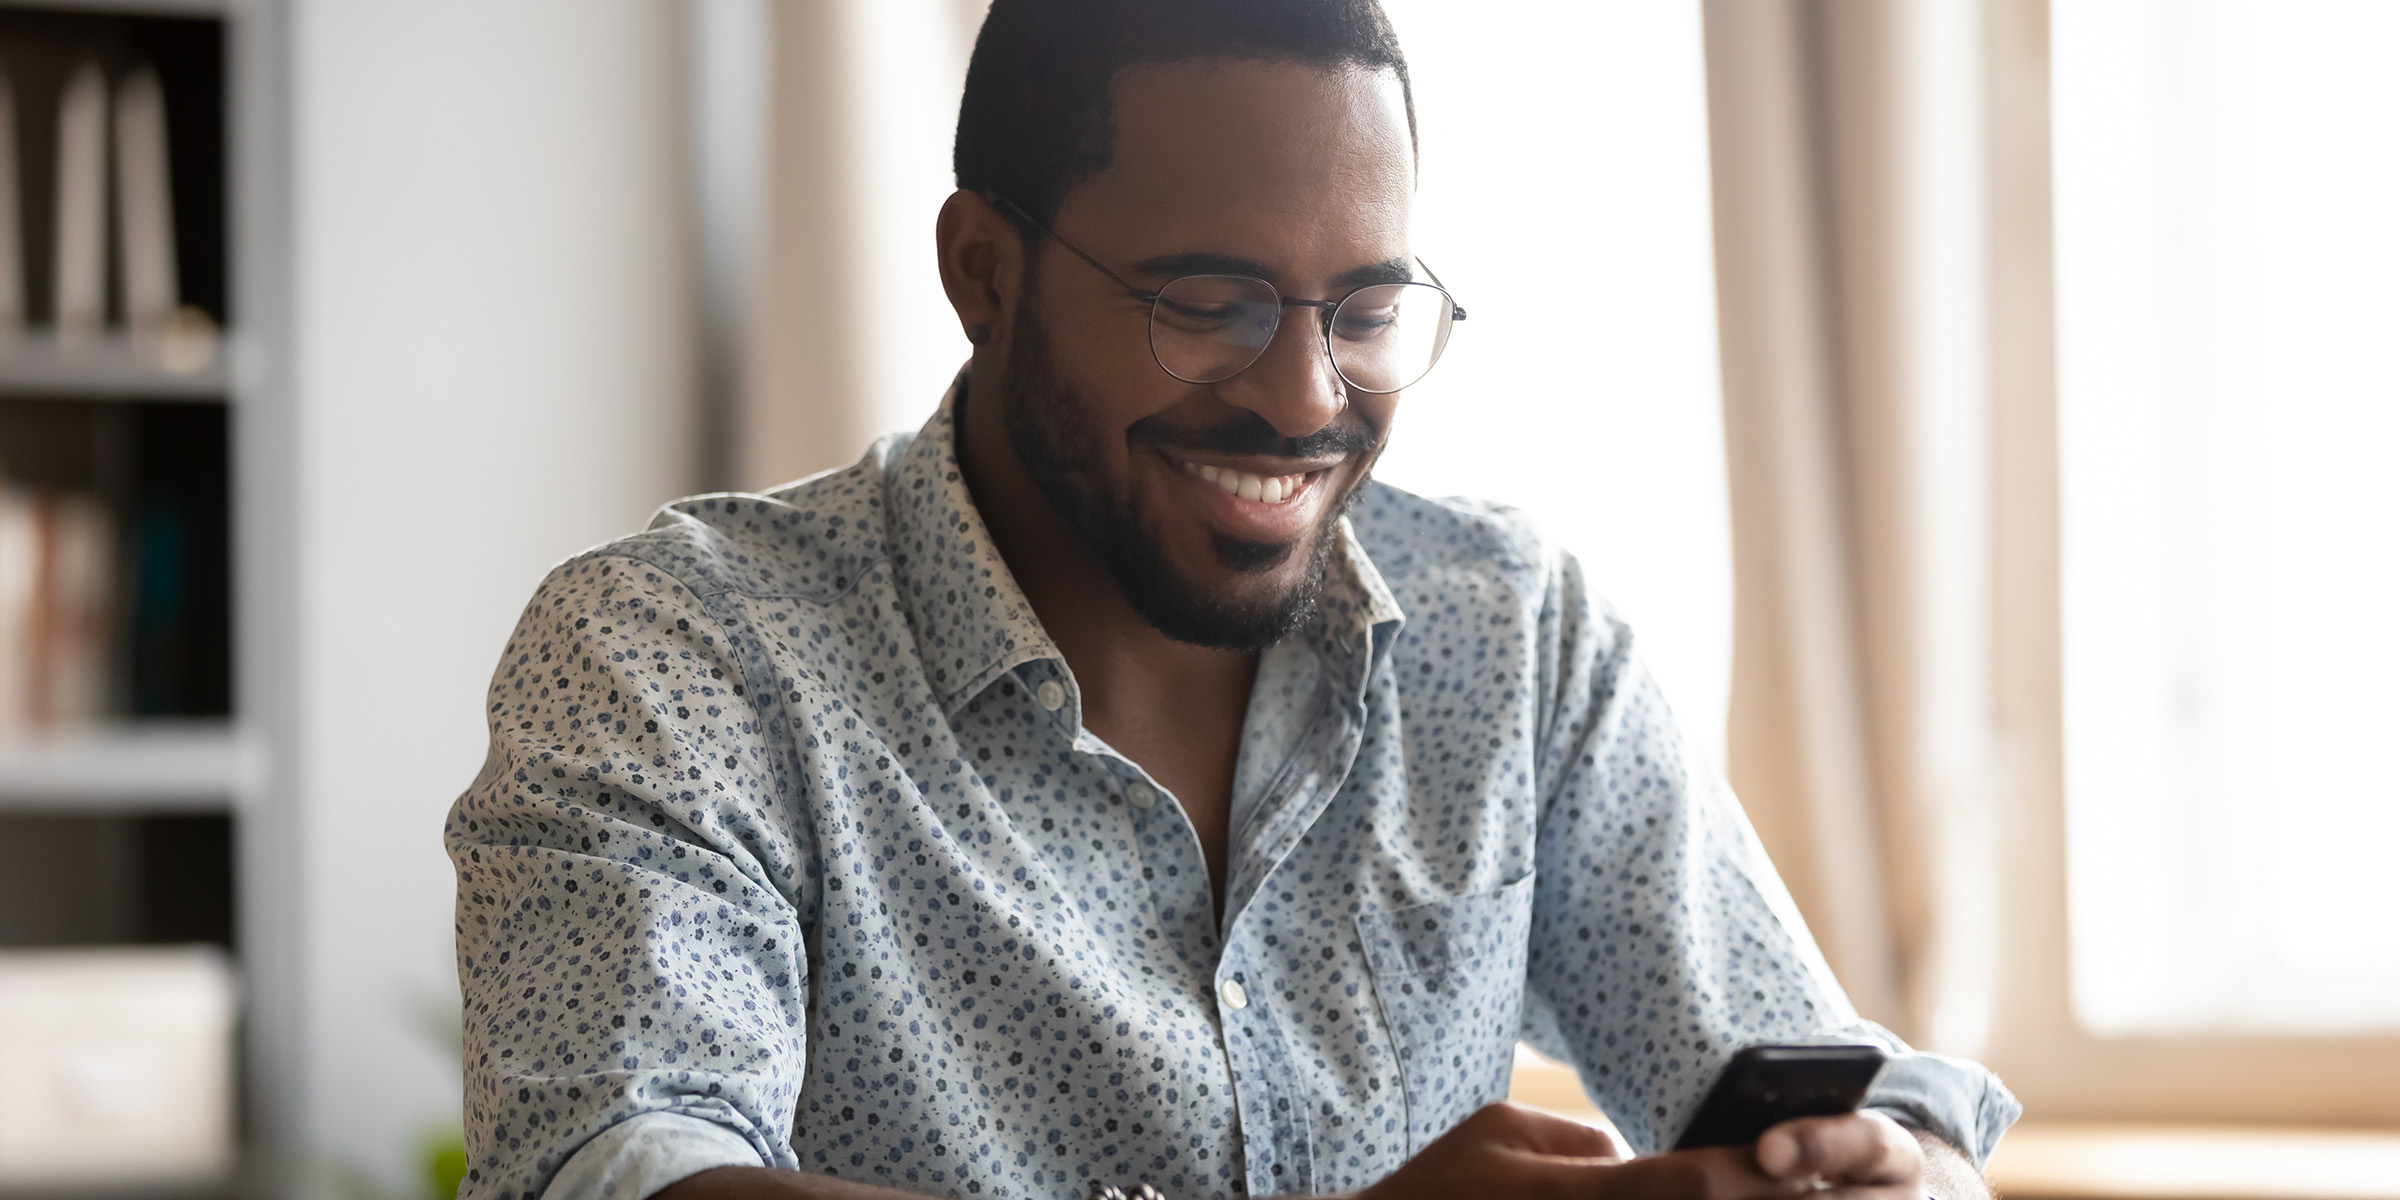 Man smiles and looks at smart phone